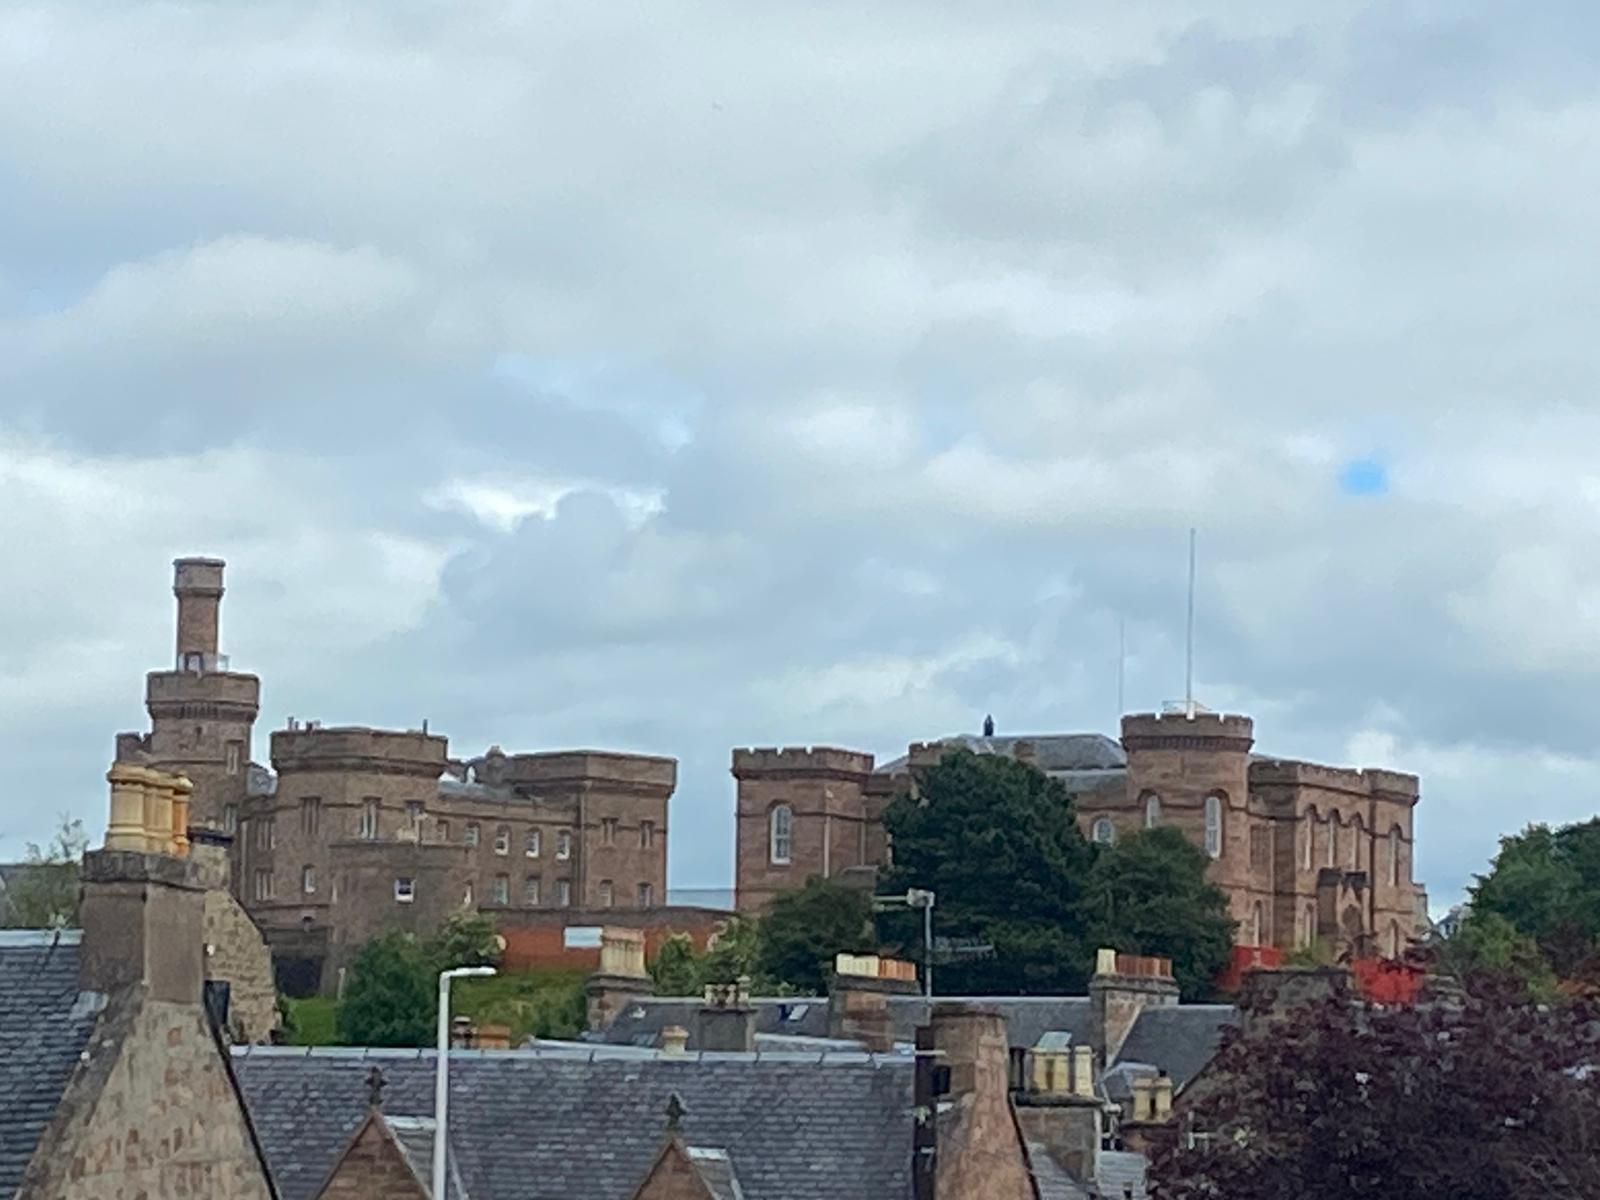 Views to Inverness Castle